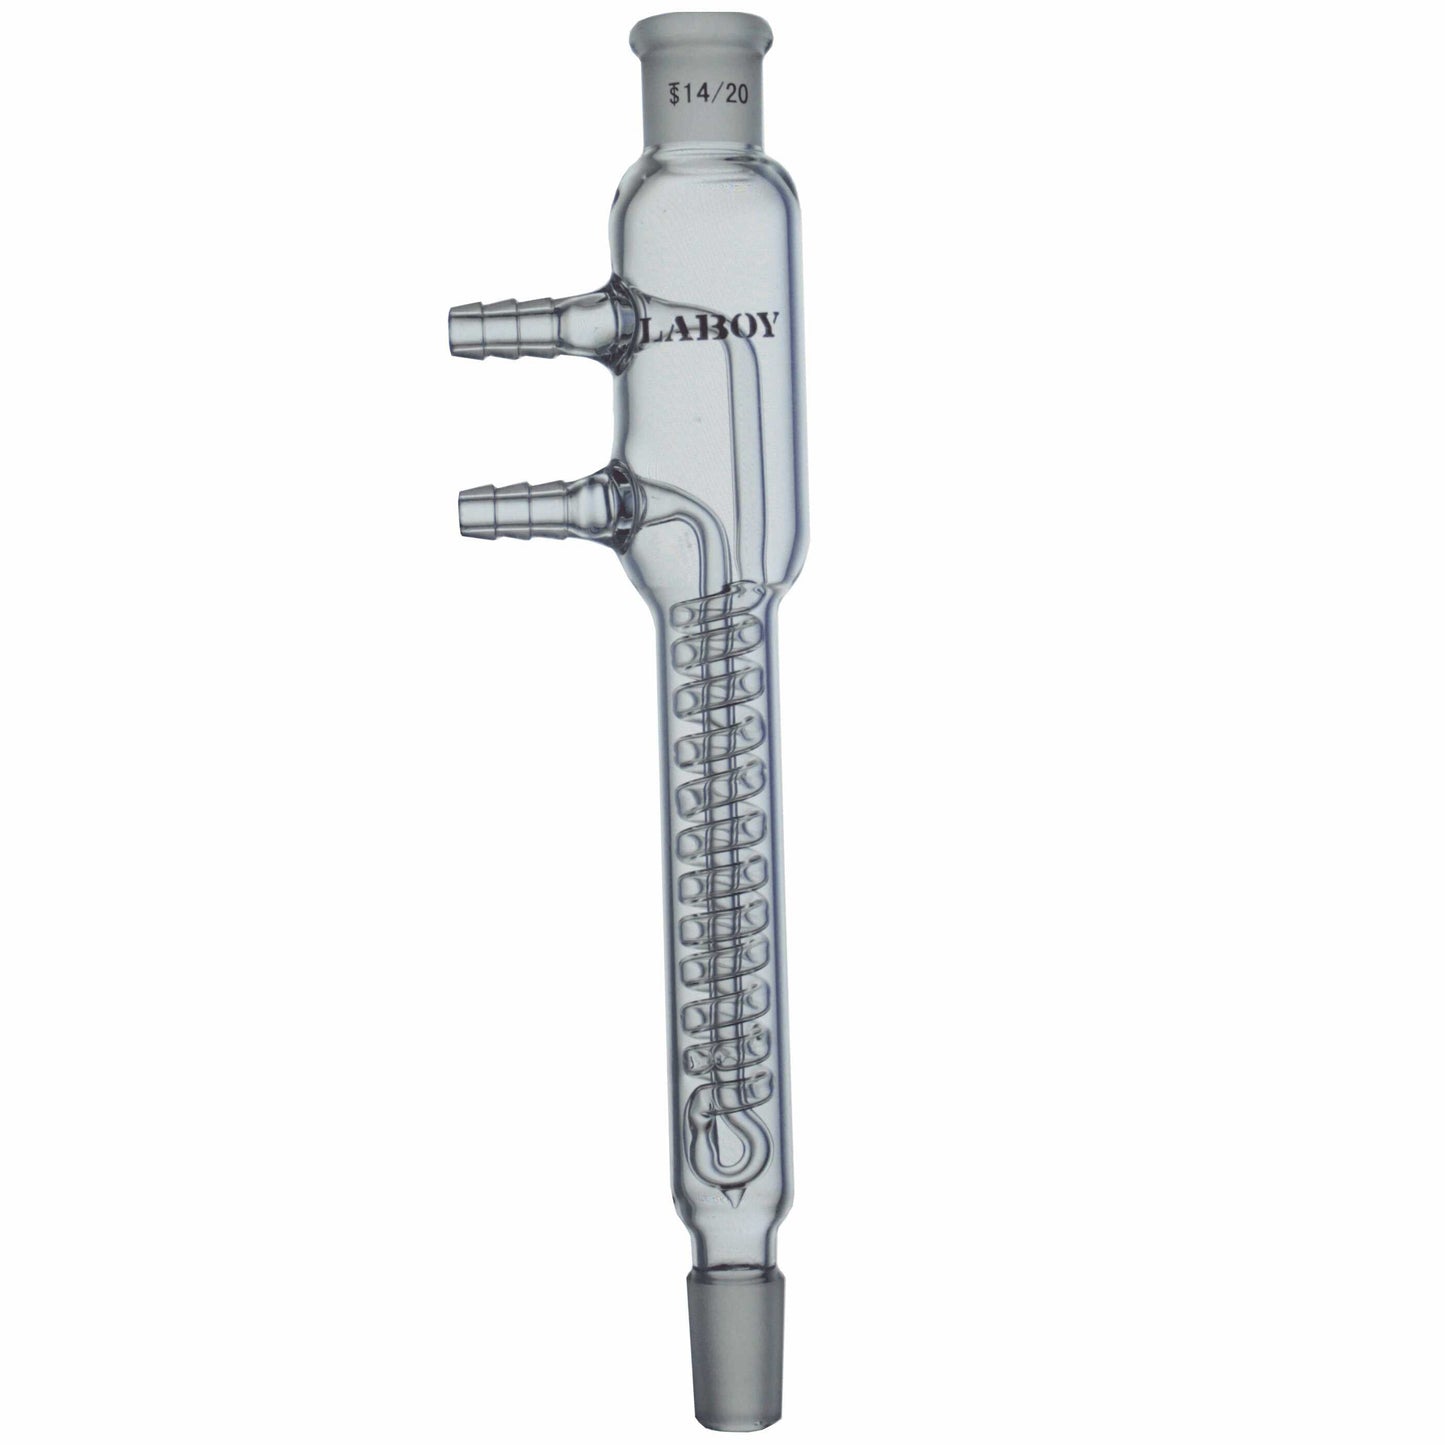 Glass Reflux Condenser With Taper Joints and Hose Connections - Scienmart